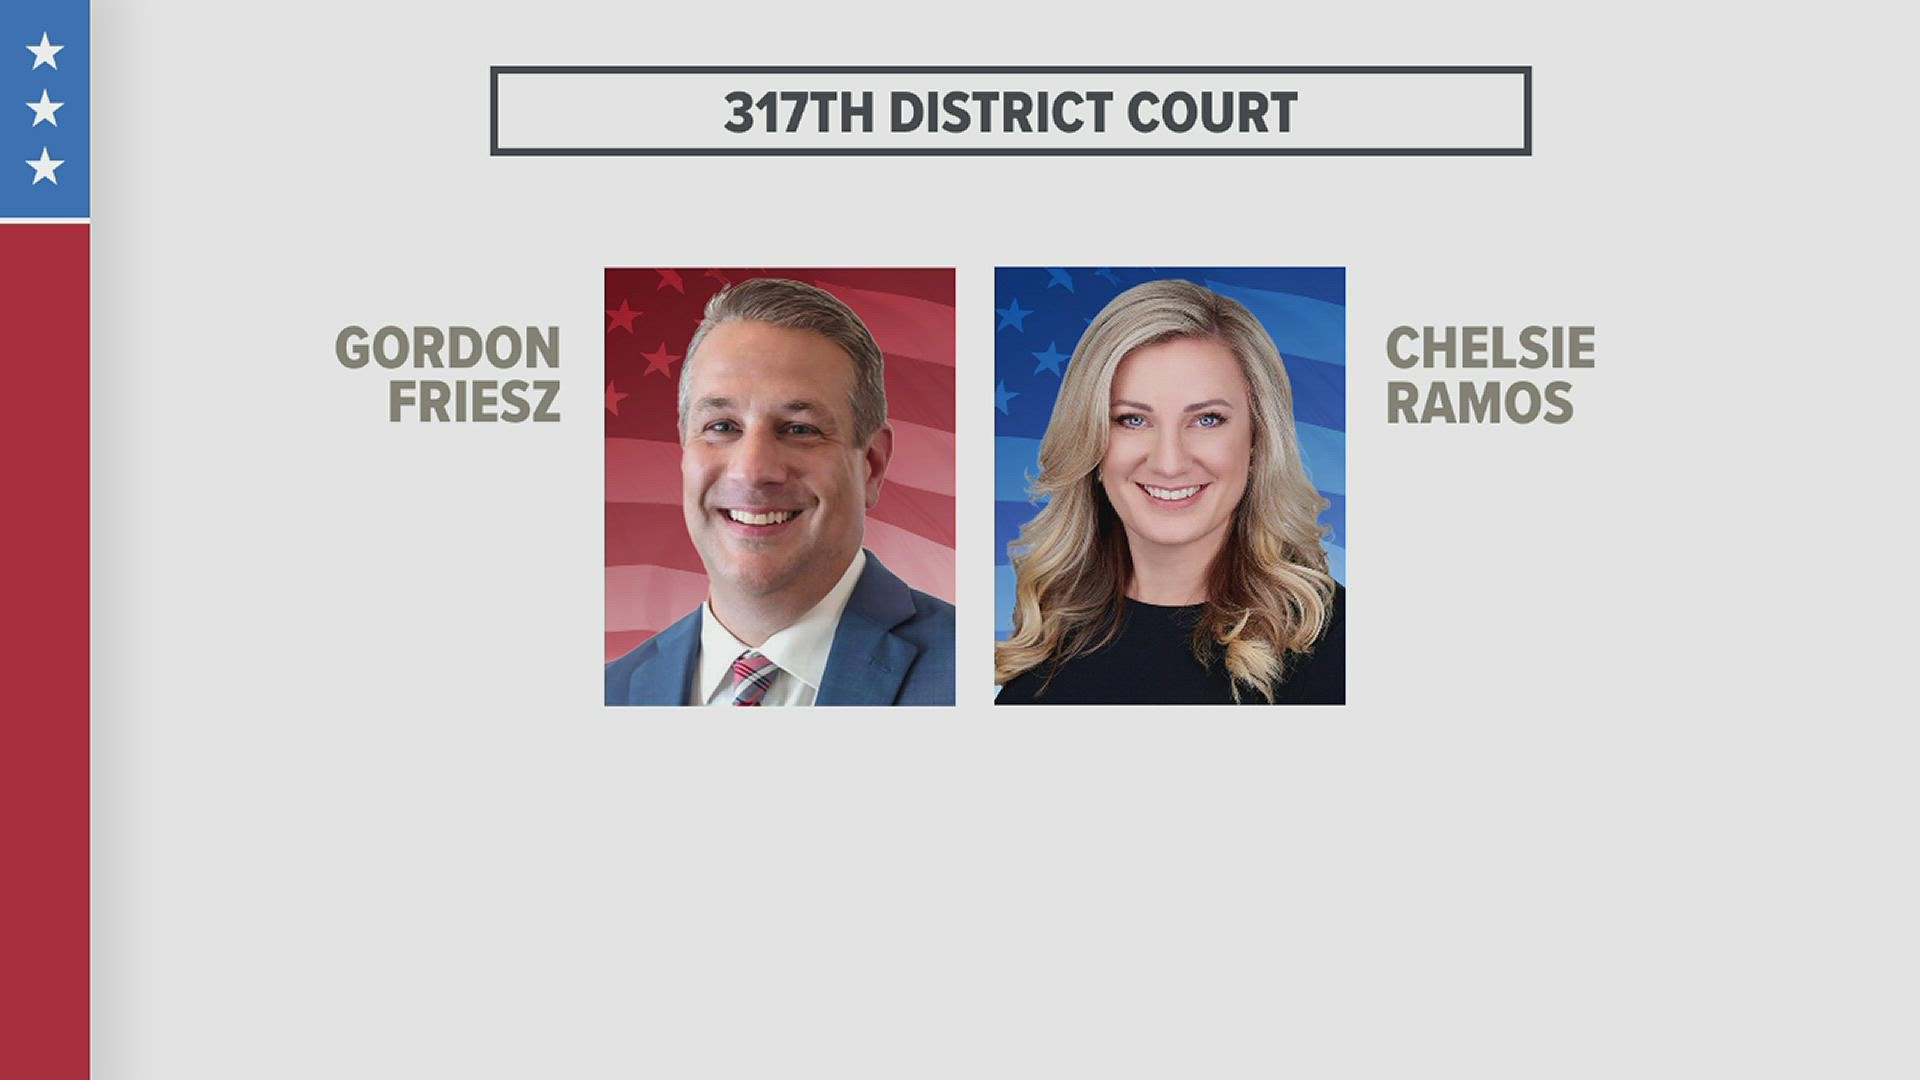 The winner will handle everything from custody battles to criminal cases involving minors. Both candidates believe they have the credentials to get the job done.